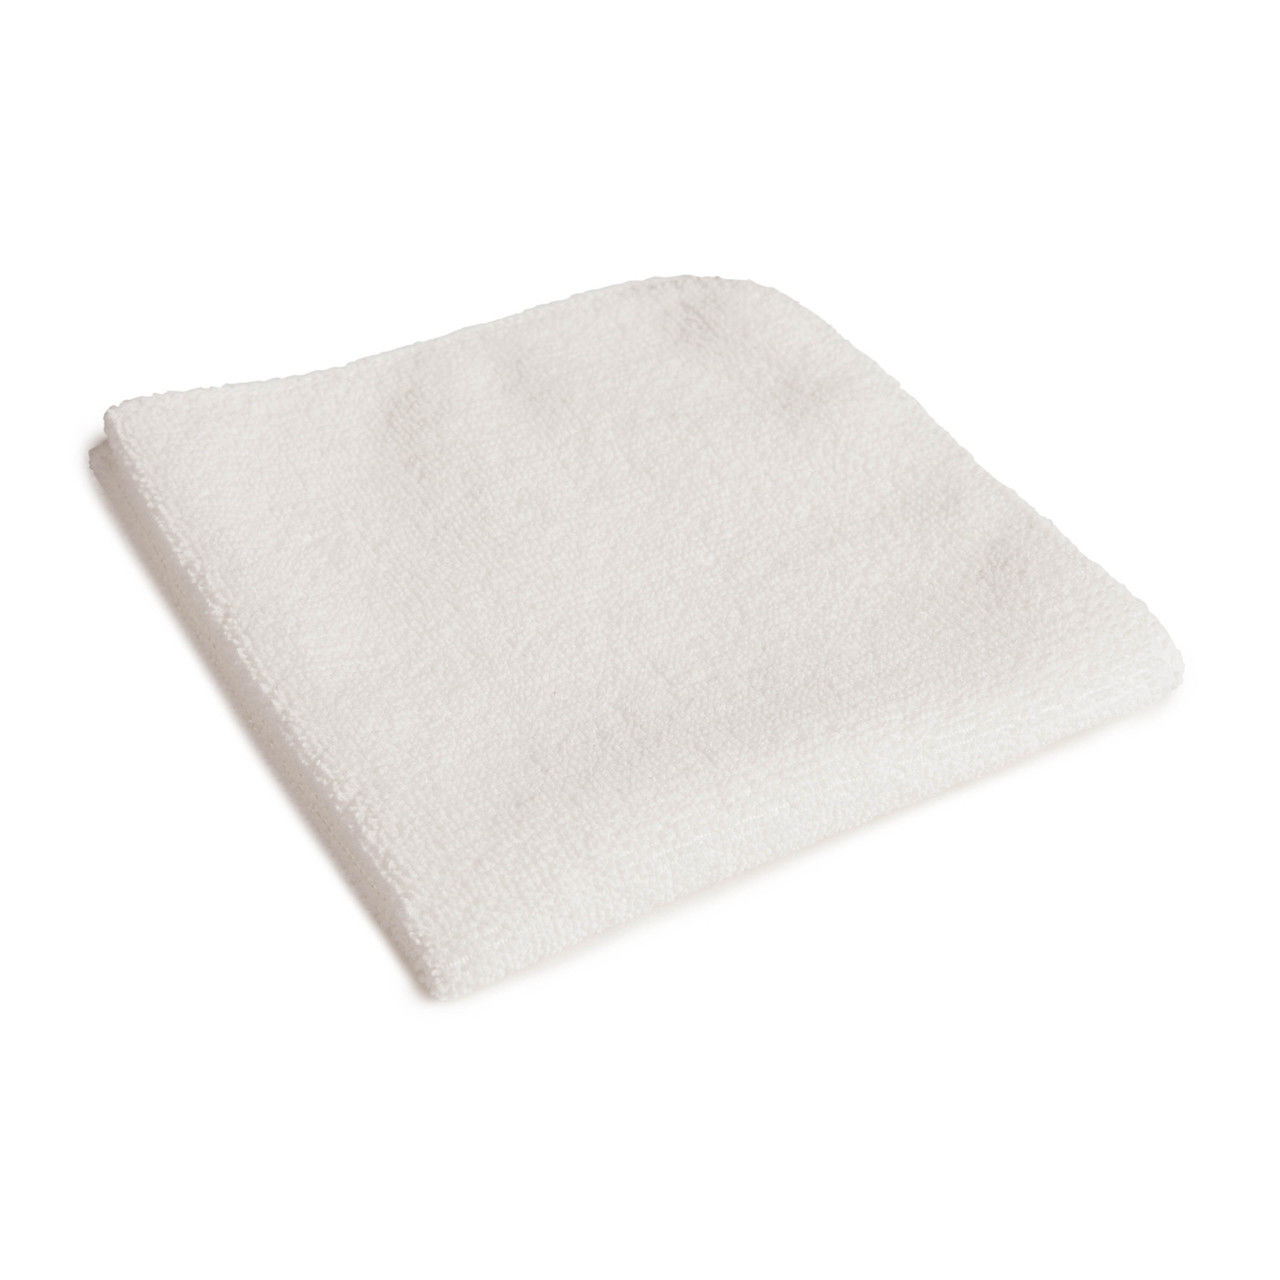 Can you tell me the dimensions of these dairy towels in the Dairy Towel Washcloth product?